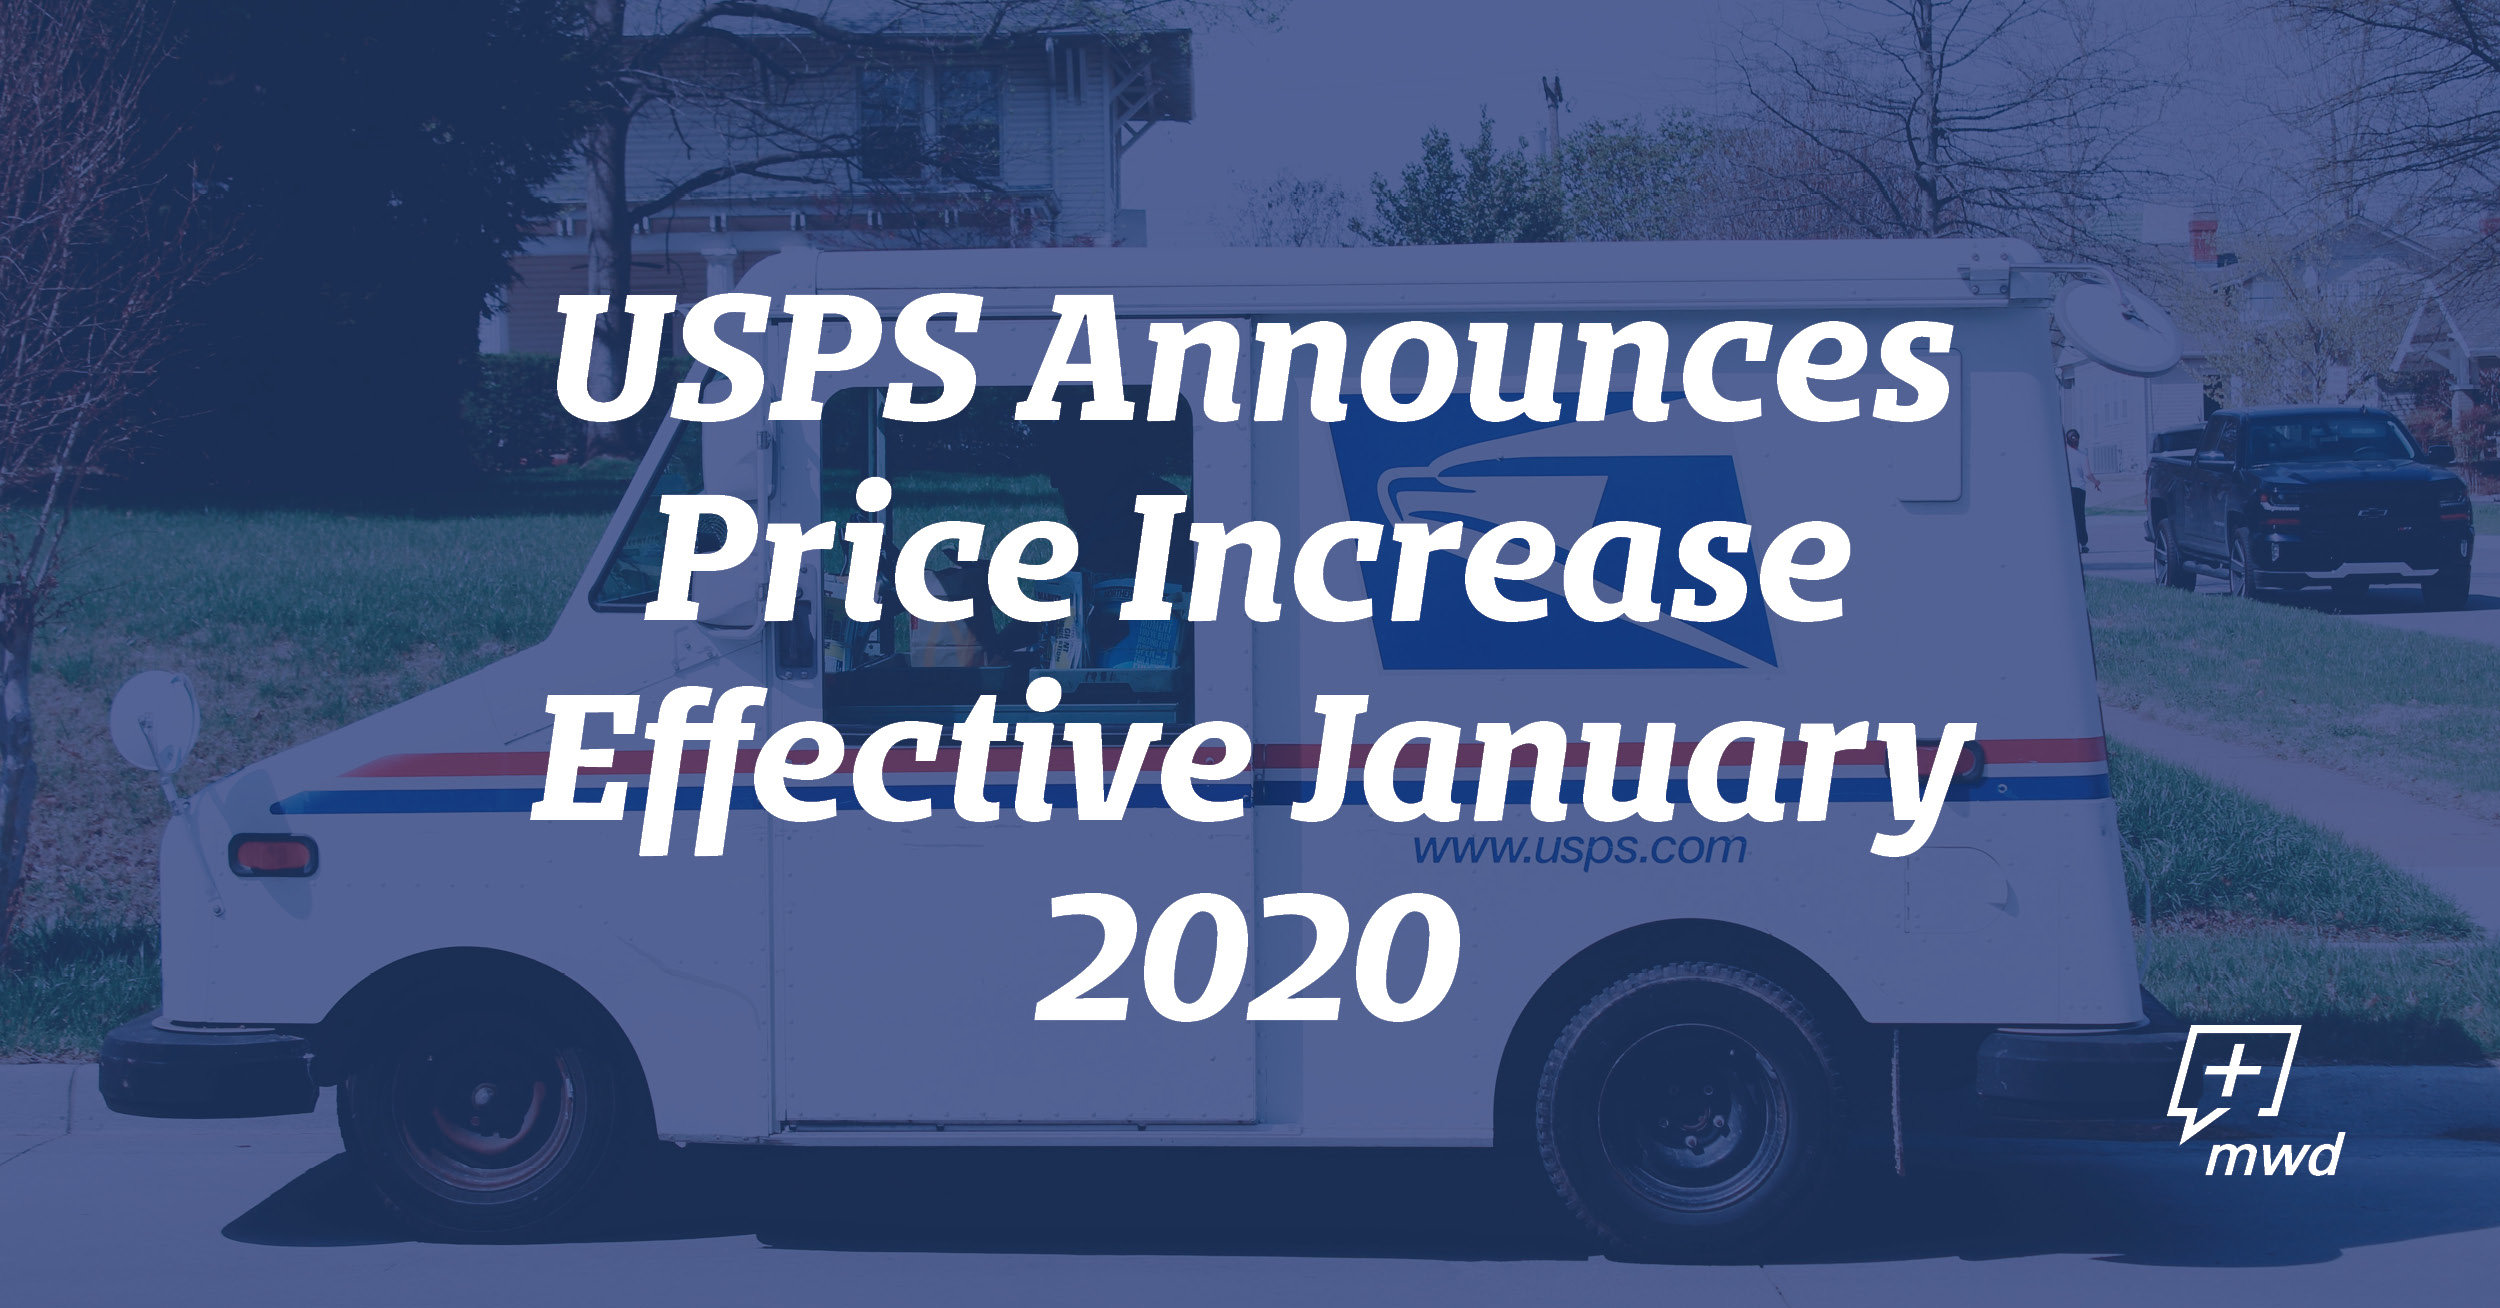 USPS Announces Price Increase Effective January 2020 | Midwest Direct